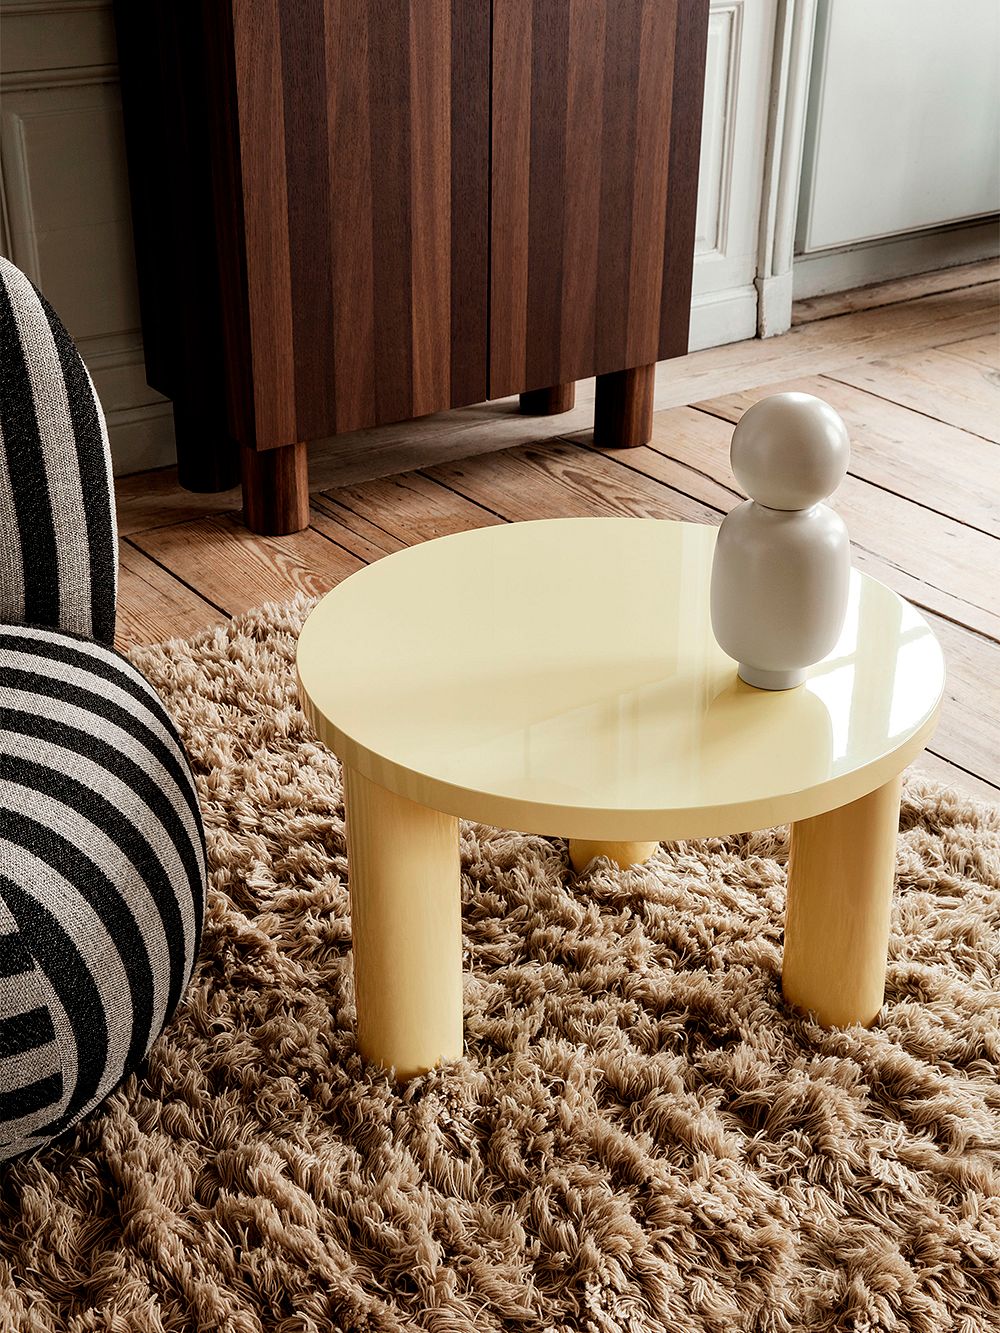 An image of ferm LIVING's yellow Post coffee table and wooden Post storage cabinet as part of the living room decor.